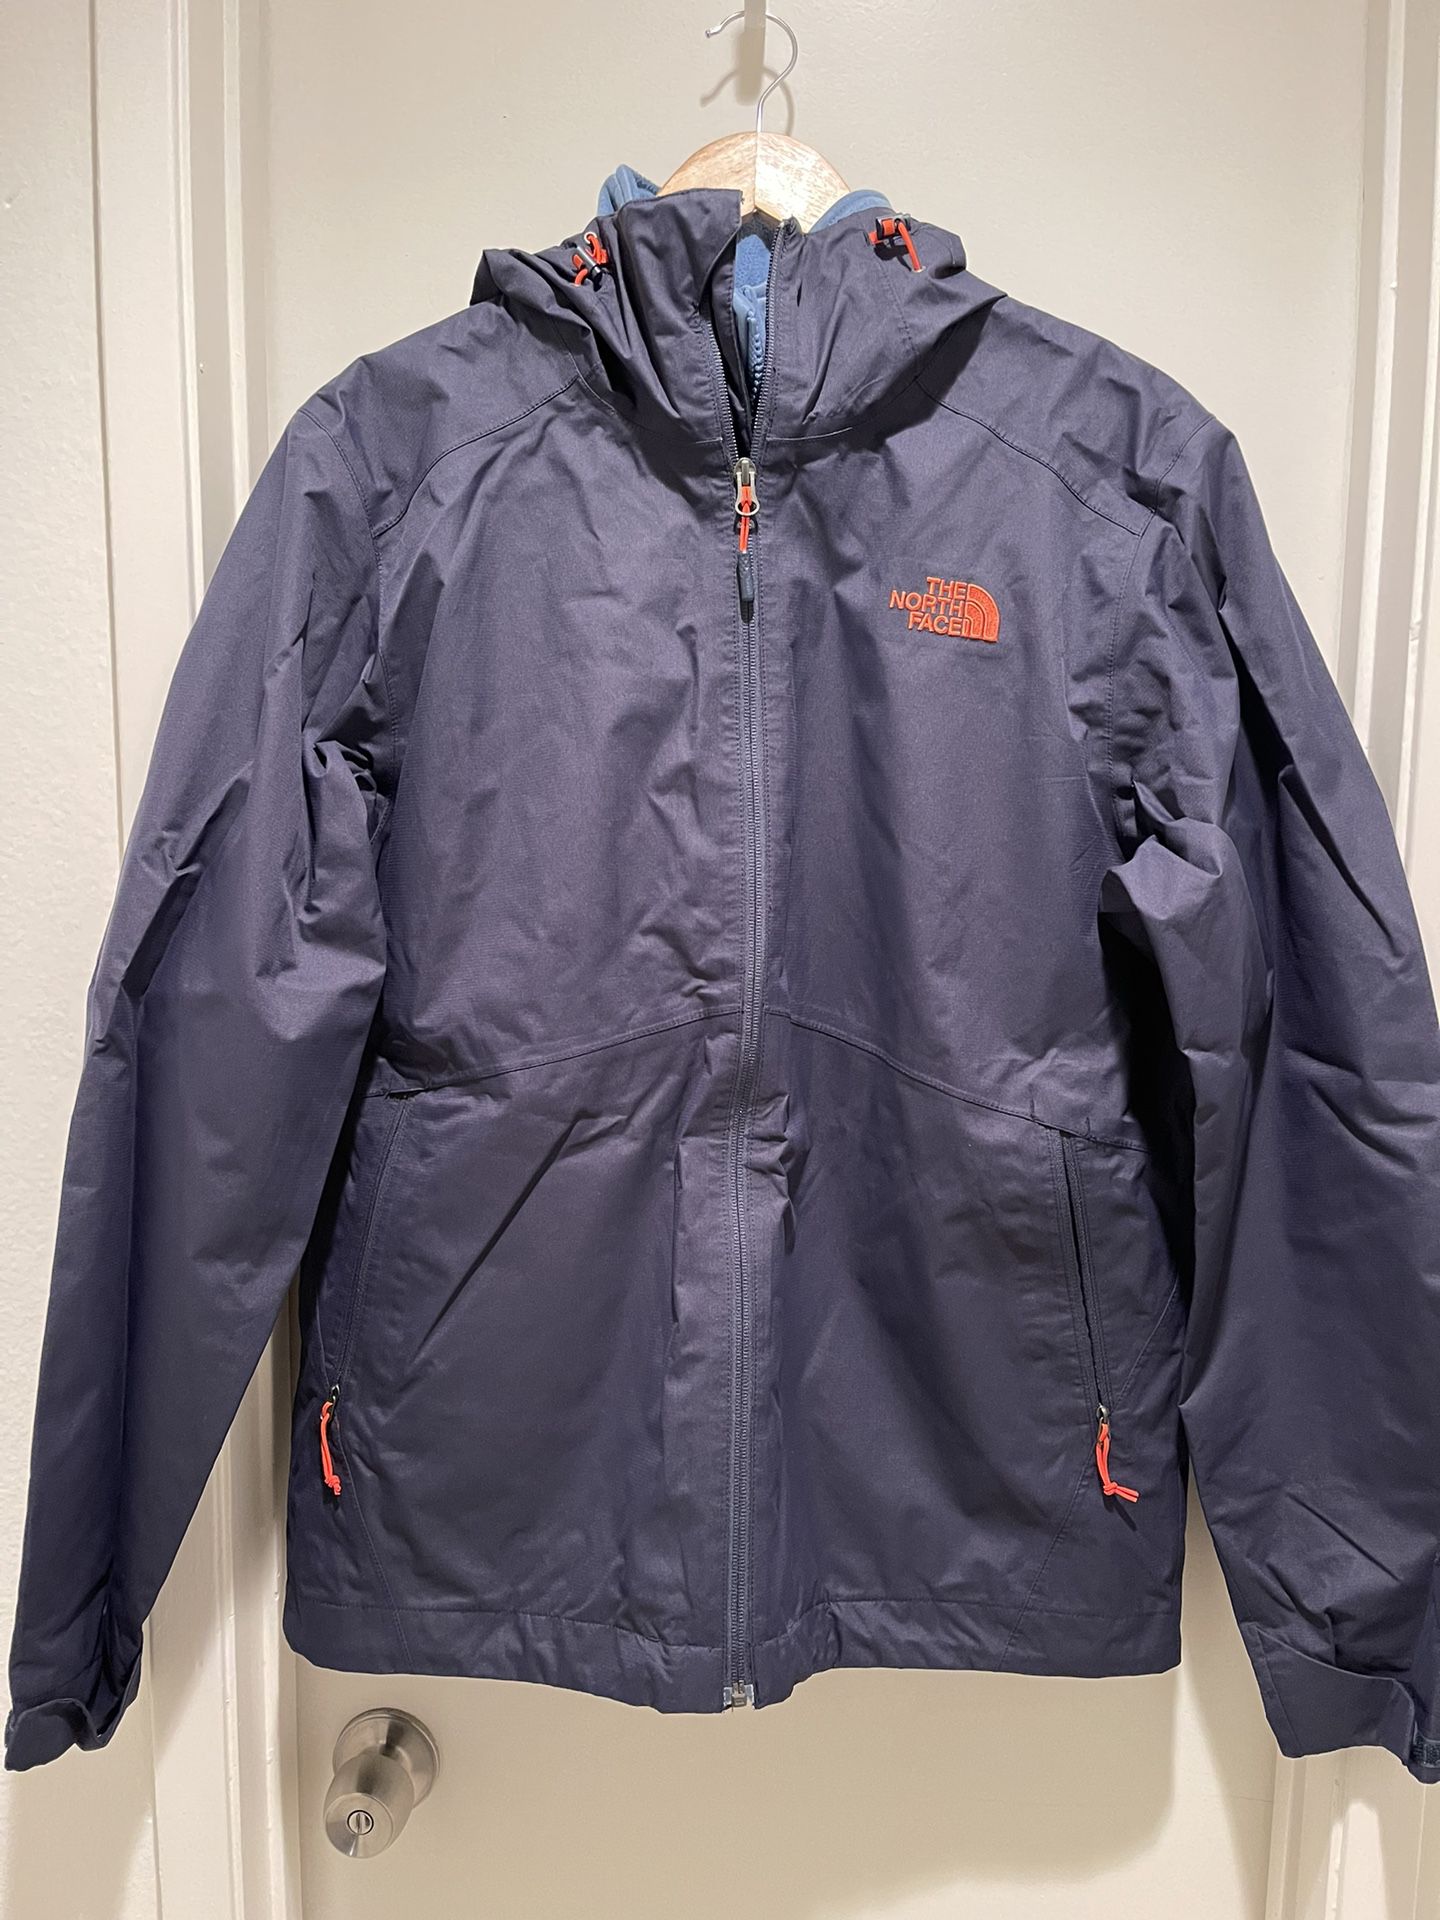 North Face 2 Layers Triclimate Medium M Jacket Waterproof 